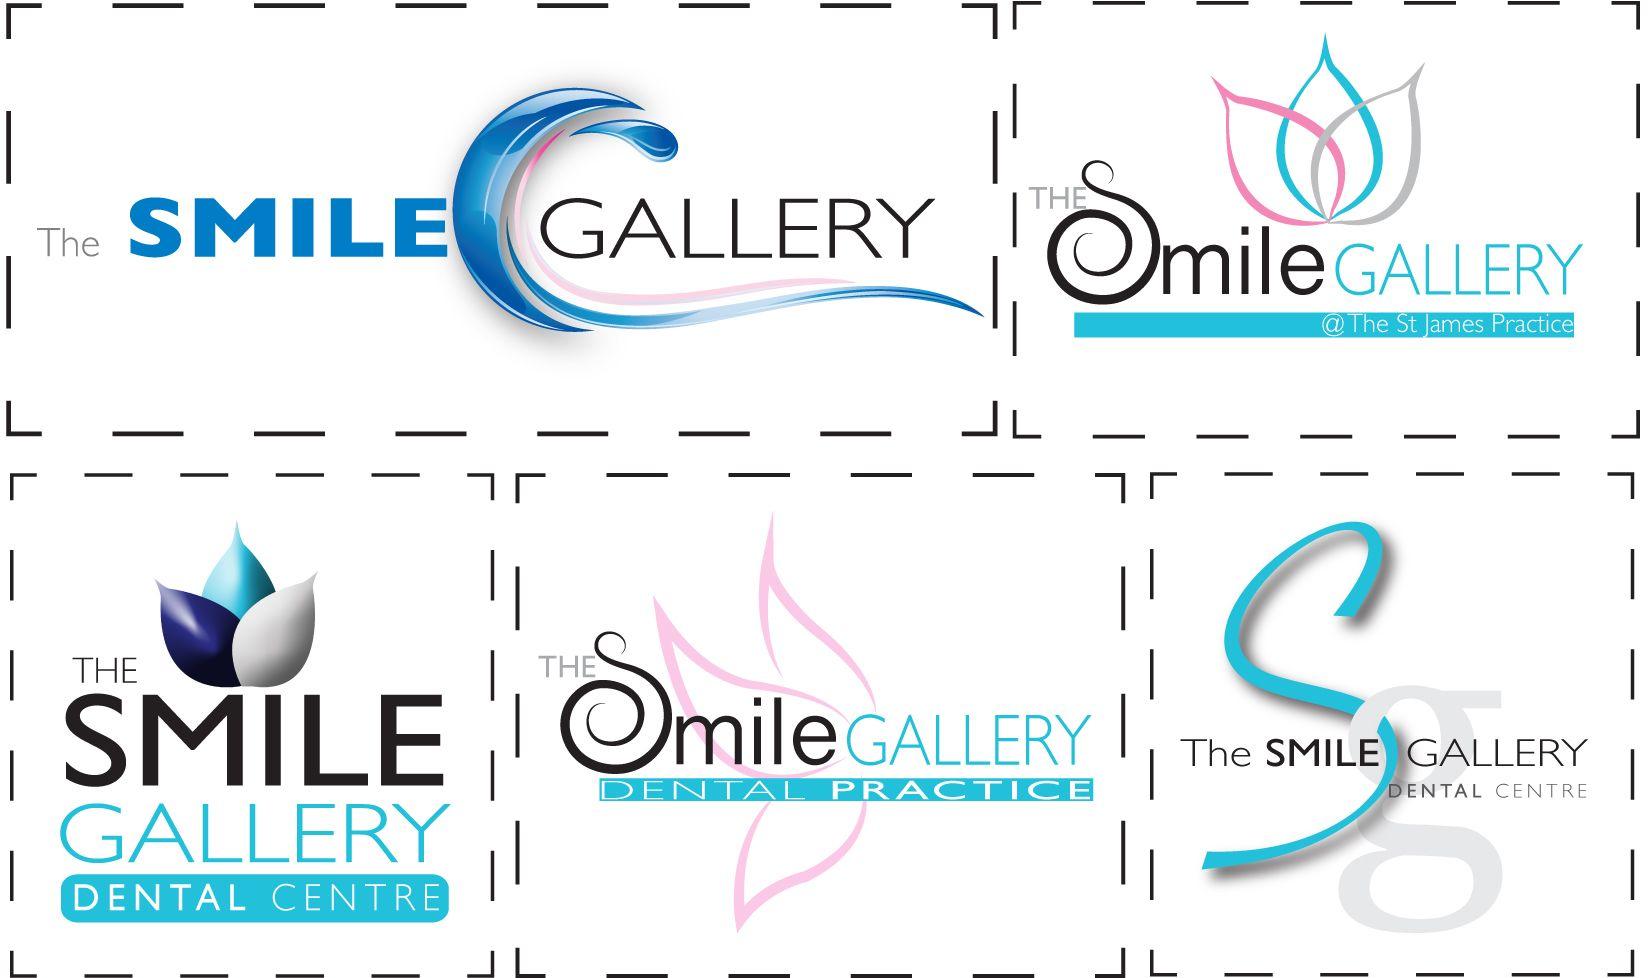 Lily Name Logo - Local dental practice logo design and signage ideas